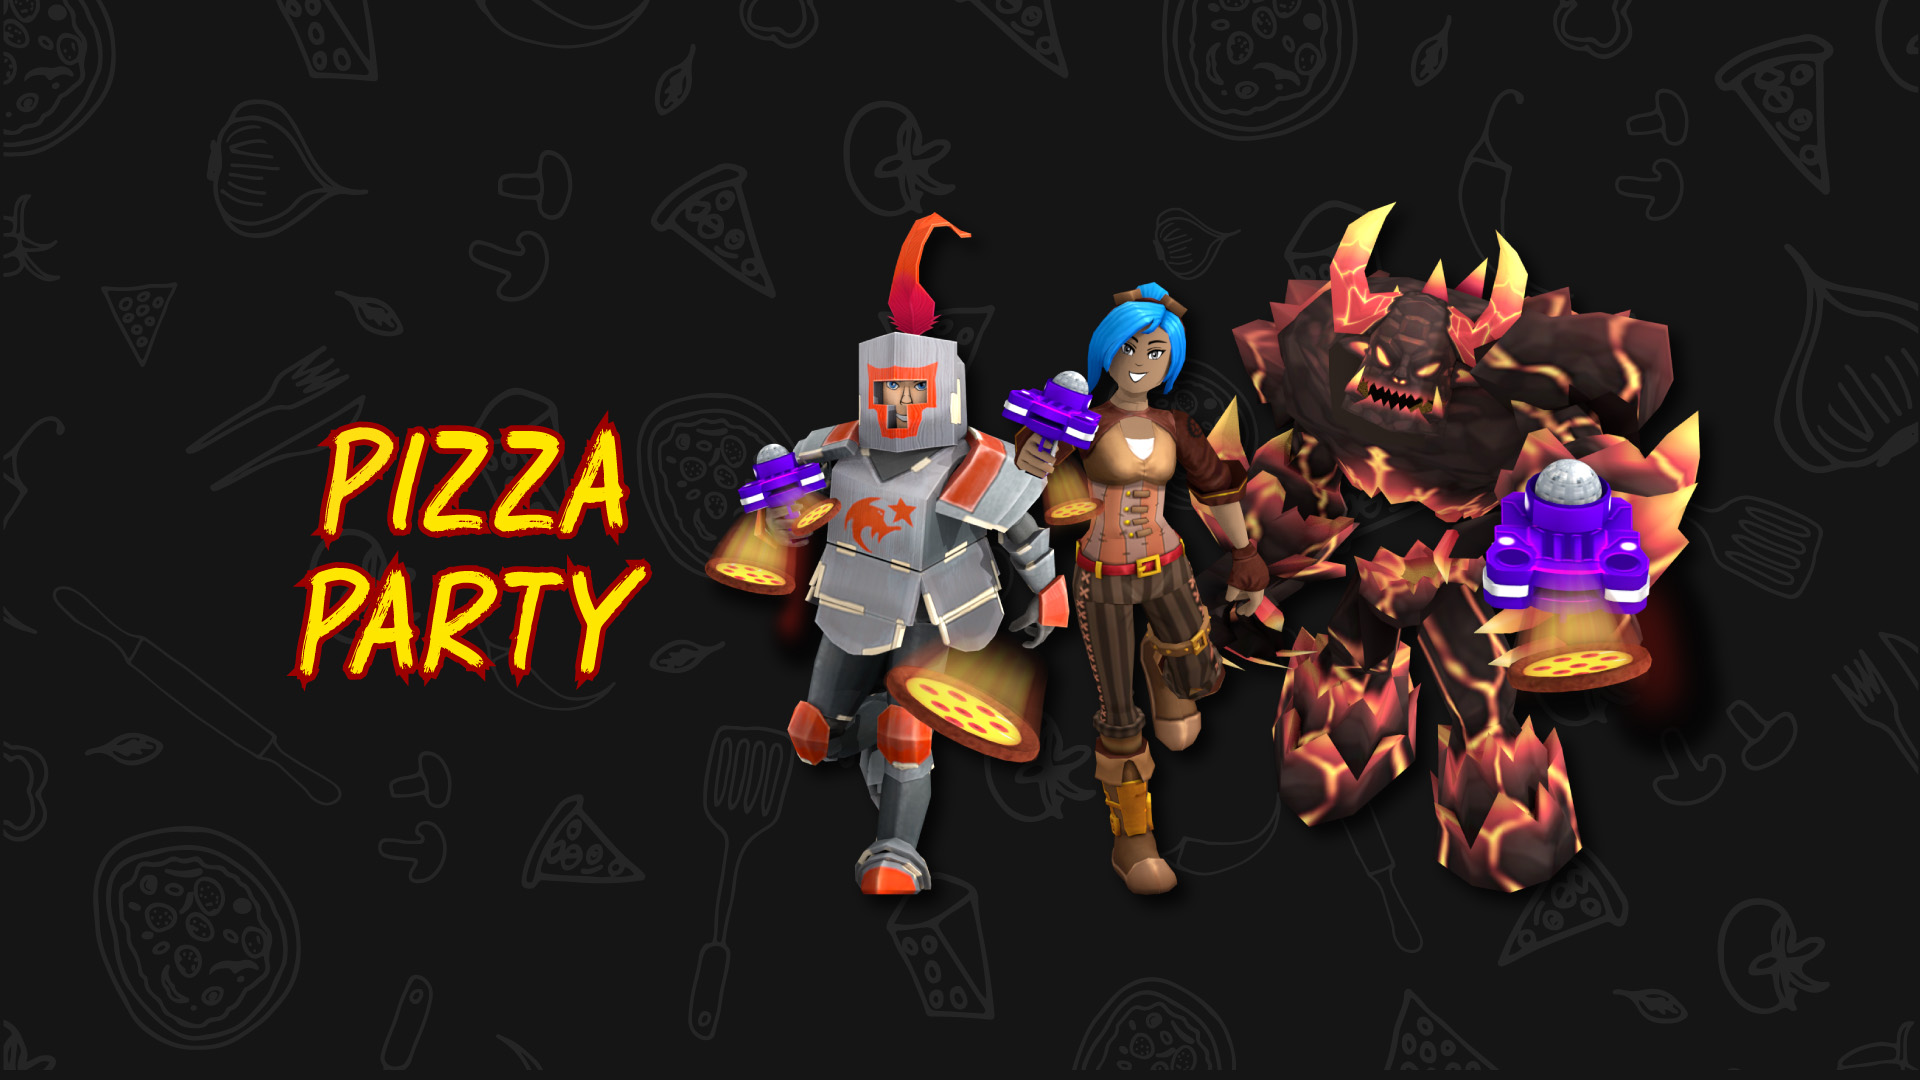 Pizza Party Event Work At A Pizza Place Wiki Fandom - roblox work at a pizza place pizza party event is roblox a